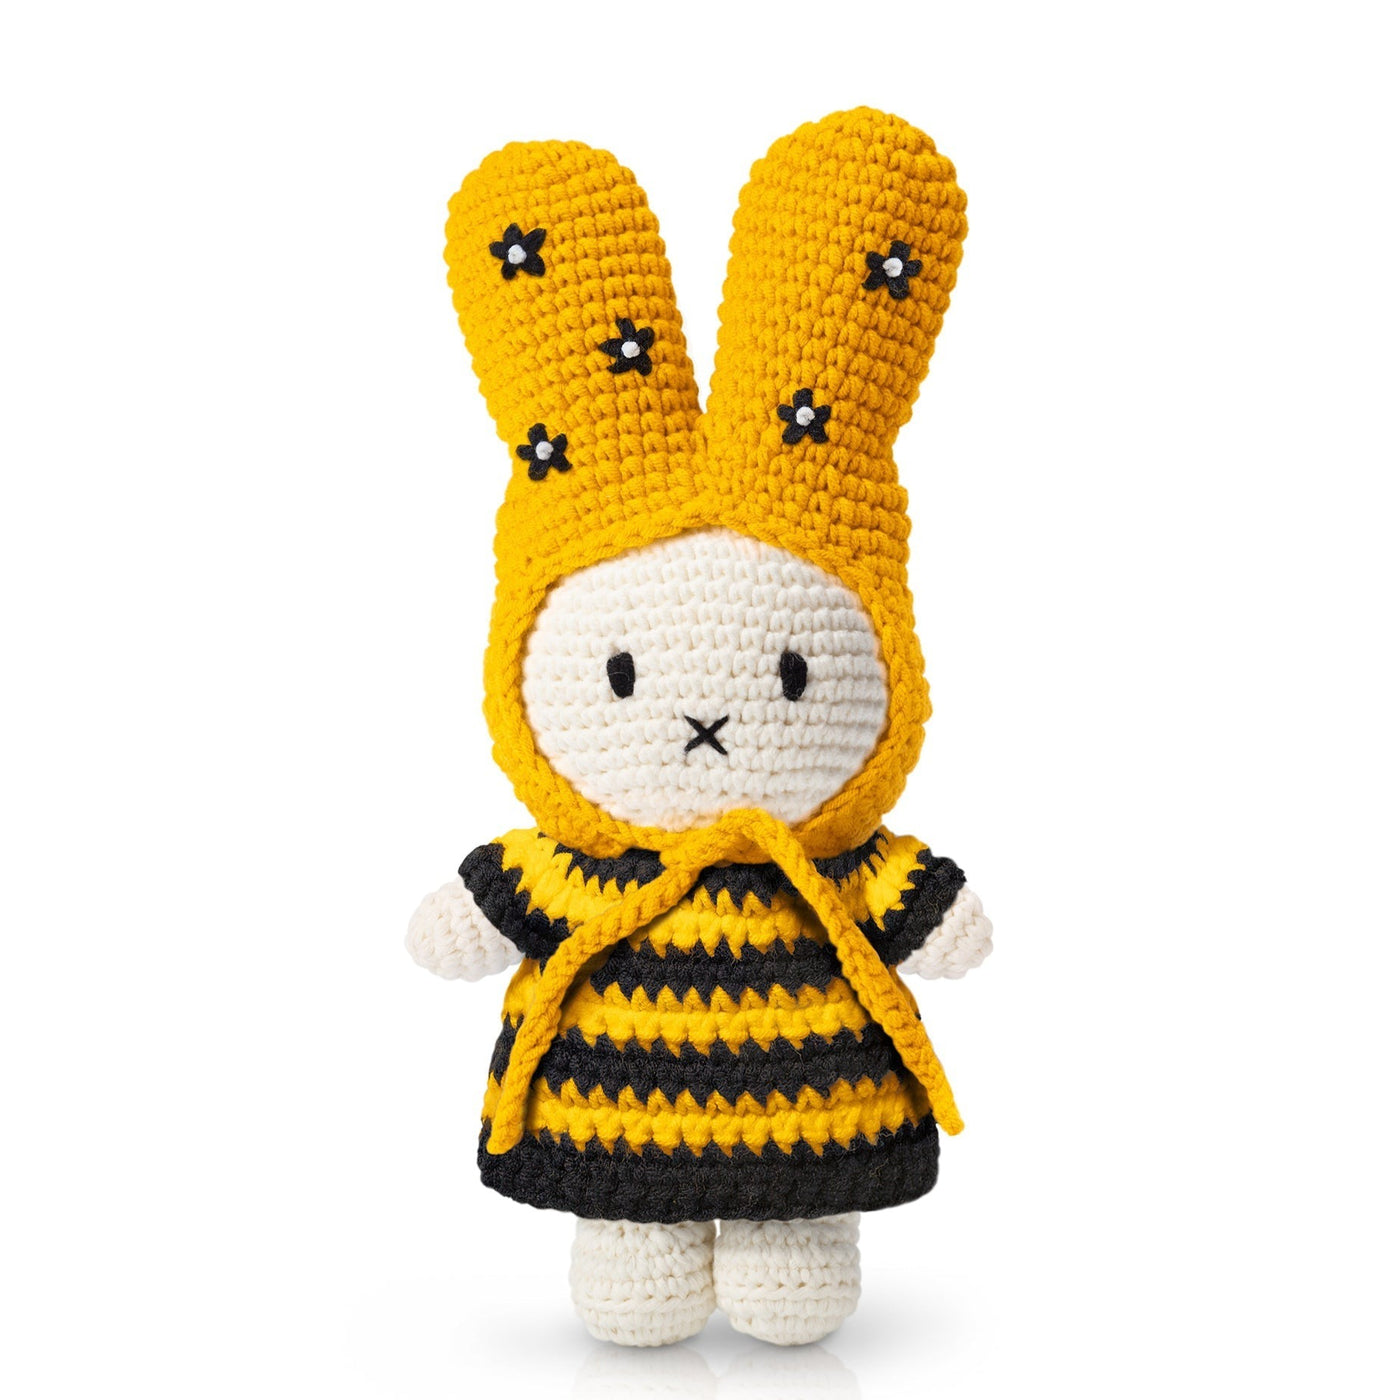 Crocheted Miffy Bumble Bee Dress With Flower Hat